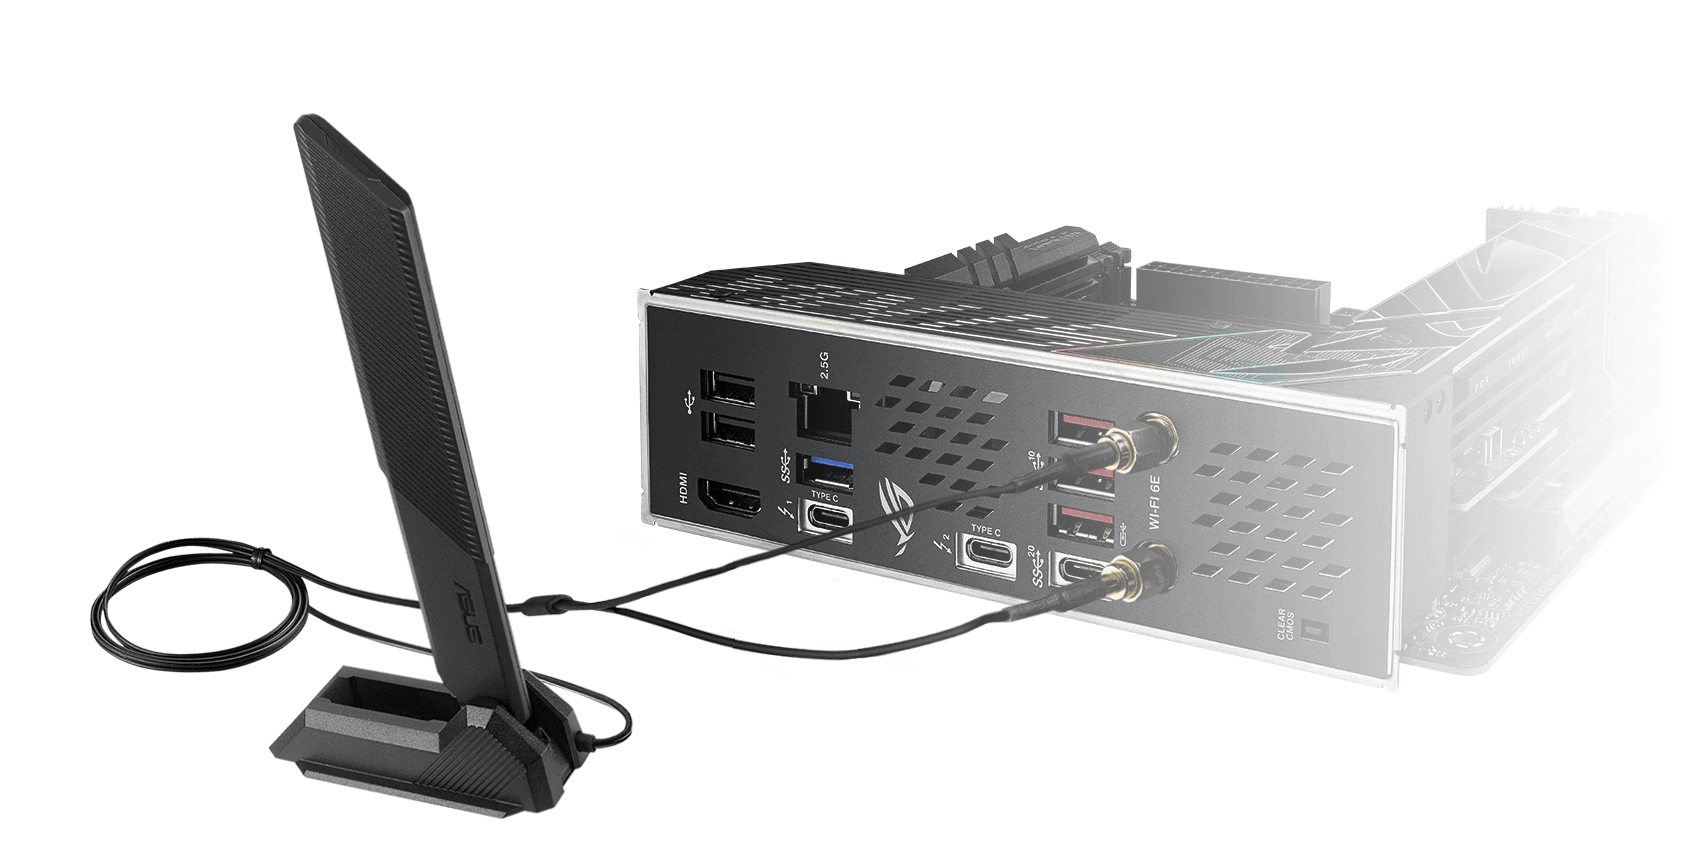 ROG Strix Z790-I features WiFi 6E, an included antenna, and 2.5 Gb ethernet